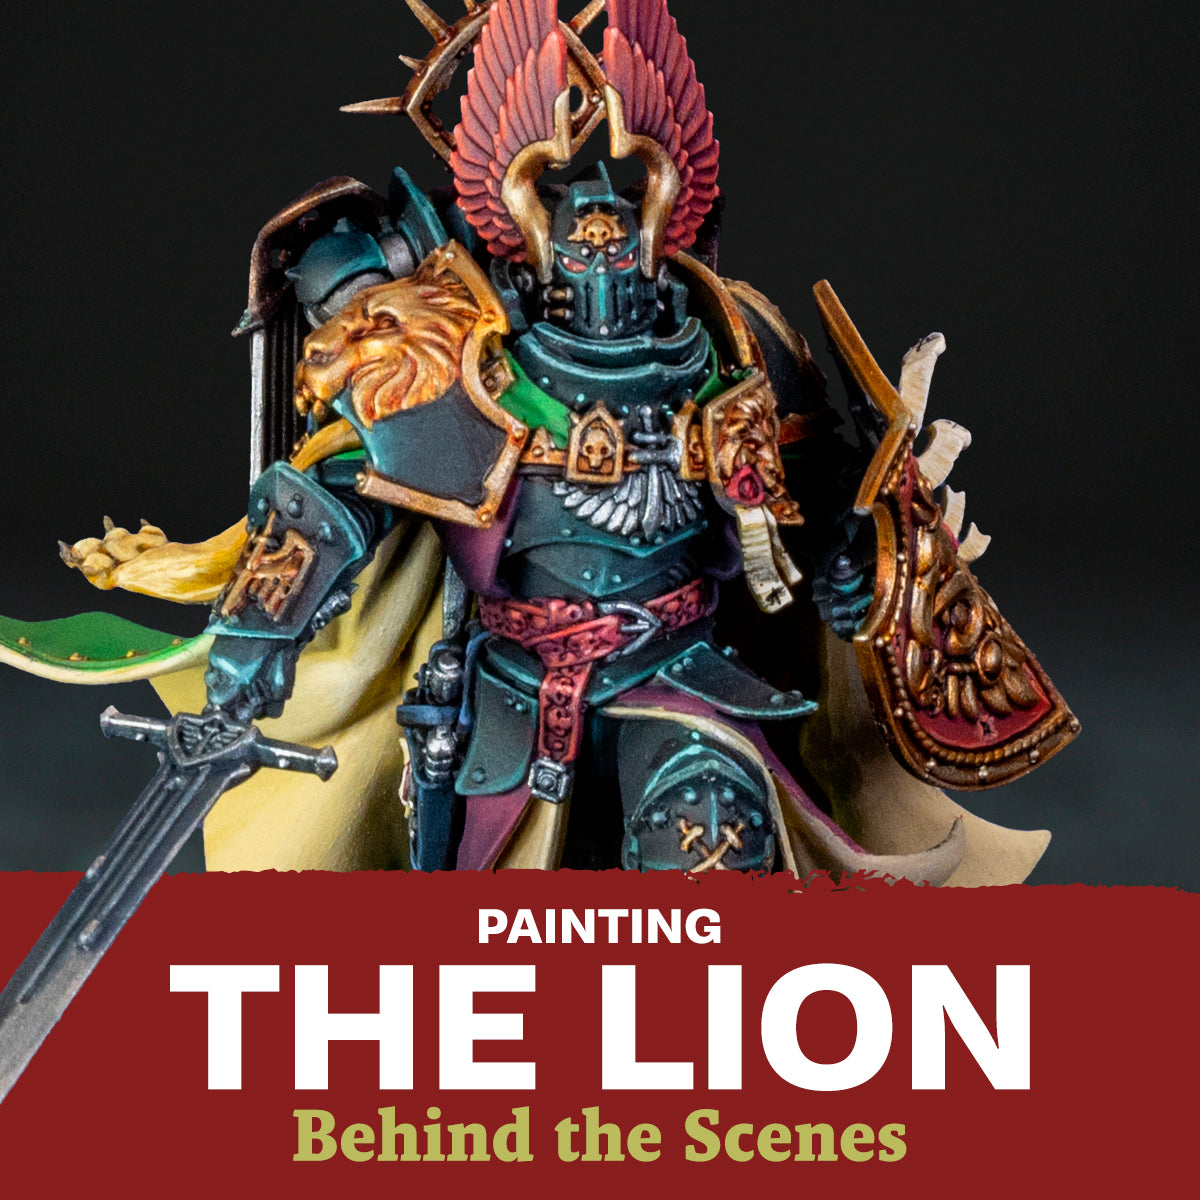 Painting the Lion: Behind the Scenes